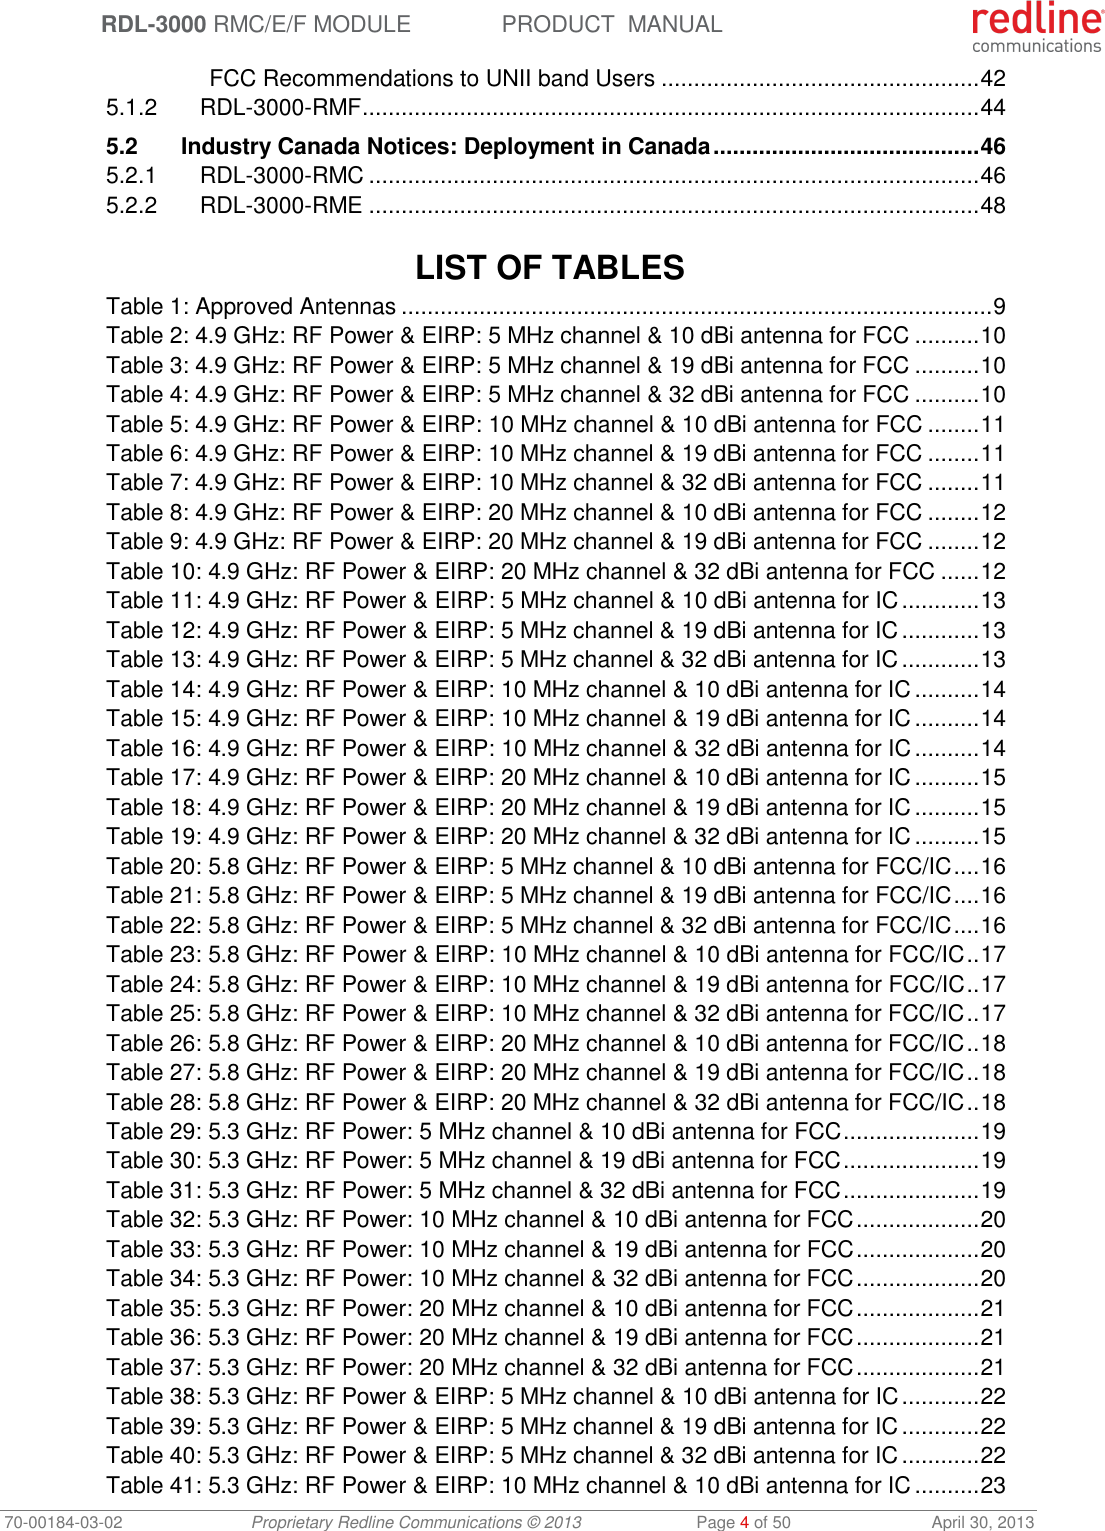  RDL-3000 RMC/E/F MODULE PRODUCT  MANUAL 70-00184-03-02 Proprietary Redline Communications © 2013  Page 4 of 50  April 30, 2013 FCC Recommendations to UNII band Users ................................................. 42 5.1.2 RDL-3000-RMF ............................................................................................... 44 5.2 Industry Canada Notices: Deployment in Canada ......................................... 46 5.2.1 RDL-3000-RMC .............................................................................................. 46 5.2.2 RDL-3000-RME .............................................................................................. 48   LIST OF TABLES Table 1: Approved Antennas ........................................................................................... 9 Table 2: 4.9 GHz: RF Power &amp; EIRP: 5 MHz channel &amp; 10 dBi antenna for FCC .......... 10 Table 3: 4.9 GHz: RF Power &amp; EIRP: 5 MHz channel &amp; 19 dBi antenna for FCC .......... 10 Table 4: 4.9 GHz: RF Power &amp; EIRP: 5 MHz channel &amp; 32 dBi antenna for FCC .......... 10 Table 5: 4.9 GHz: RF Power &amp; EIRP: 10 MHz channel &amp; 10 dBi antenna for FCC ........ 11 Table 6: 4.9 GHz: RF Power &amp; EIRP: 10 MHz channel &amp; 19 dBi antenna for FCC ........ 11 Table 7: 4.9 GHz: RF Power &amp; EIRP: 10 MHz channel &amp; 32 dBi antenna for FCC ........ 11 Table 8: 4.9 GHz: RF Power &amp; EIRP: 20 MHz channel &amp; 10 dBi antenna for FCC ........ 12 Table 9: 4.9 GHz: RF Power &amp; EIRP: 20 MHz channel &amp; 19 dBi antenna for FCC ........ 12 Table 10: 4.9 GHz: RF Power &amp; EIRP: 20 MHz channel &amp; 32 dBi antenna for FCC ...... 12 Table 11: 4.9 GHz: RF Power &amp; EIRP: 5 MHz channel &amp; 10 dBi antenna for IC ............ 13 Table 12: 4.9 GHz: RF Power &amp; EIRP: 5 MHz channel &amp; 19 dBi antenna for IC ............ 13 Table 13: 4.9 GHz: RF Power &amp; EIRP: 5 MHz channel &amp; 32 dBi antenna for IC ............ 13 Table 14: 4.9 GHz: RF Power &amp; EIRP: 10 MHz channel &amp; 10 dBi antenna for IC .......... 14 Table 15: 4.9 GHz: RF Power &amp; EIRP: 10 MHz channel &amp; 19 dBi antenna for IC .......... 14 Table 16: 4.9 GHz: RF Power &amp; EIRP: 10 MHz channel &amp; 32 dBi antenna for IC .......... 14 Table 17: 4.9 GHz: RF Power &amp; EIRP: 20 MHz channel &amp; 10 dBi antenna for IC .......... 15 Table 18: 4.9 GHz: RF Power &amp; EIRP: 20 MHz channel &amp; 19 dBi antenna for IC .......... 15 Table 19: 4.9 GHz: RF Power &amp; EIRP: 20 MHz channel &amp; 32 dBi antenna for IC .......... 15 Table 20: 5.8 GHz: RF Power &amp; EIRP: 5 MHz channel &amp; 10 dBi antenna for FCC/IC .... 16 Table 21: 5.8 GHz: RF Power &amp; EIRP: 5 MHz channel &amp; 19 dBi antenna for FCC/IC .... 16 Table 22: 5.8 GHz: RF Power &amp; EIRP: 5 MHz channel &amp; 32 dBi antenna for FCC/IC .... 16 Table 23: 5.8 GHz: RF Power &amp; EIRP: 10 MHz channel &amp; 10 dBi antenna for FCC/IC .. 17 Table 24: 5.8 GHz: RF Power &amp; EIRP: 10 MHz channel &amp; 19 dBi antenna for FCC/IC .. 17 Table 25: 5.8 GHz: RF Power &amp; EIRP: 10 MHz channel &amp; 32 dBi antenna for FCC/IC .. 17 Table 26: 5.8 GHz: RF Power &amp; EIRP: 20 MHz channel &amp; 10 dBi antenna for FCC/IC .. 18 Table 27: 5.8 GHz: RF Power &amp; EIRP: 20 MHz channel &amp; 19 dBi antenna for FCC/IC .. 18 Table 28: 5.8 GHz: RF Power &amp; EIRP: 20 MHz channel &amp; 32 dBi antenna for FCC/IC .. 18 Table 29: 5.3 GHz: RF Power: 5 MHz channel &amp; 10 dBi antenna for FCC ..................... 19 Table 30: 5.3 GHz: RF Power: 5 MHz channel &amp; 19 dBi antenna for FCC ..................... 19 Table 31: 5.3 GHz: RF Power: 5 MHz channel &amp; 32 dBi antenna for FCC ..................... 19 Table 32: 5.3 GHz: RF Power: 10 MHz channel &amp; 10 dBi antenna for FCC ................... 20 Table 33: 5.3 GHz: RF Power: 10 MHz channel &amp; 19 dBi antenna for FCC ................... 20 Table 34: 5.3 GHz: RF Power: 10 MHz channel &amp; 32 dBi antenna for FCC ................... 20 Table 35: 5.3 GHz: RF Power: 20 MHz channel &amp; 10 dBi antenna for FCC ................... 21 Table 36: 5.3 GHz: RF Power: 20 MHz channel &amp; 19 dBi antenna for FCC ................... 21 Table 37: 5.3 GHz: RF Power: 20 MHz channel &amp; 32 dBi antenna for FCC ................... 21 Table 38: 5.3 GHz: RF Power &amp; EIRP: 5 MHz channel &amp; 10 dBi antenna for IC ............ 22 Table 39: 5.3 GHz: RF Power &amp; EIRP: 5 MHz channel &amp; 19 dBi antenna for IC ............ 22 Table 40: 5.3 GHz: RF Power &amp; EIRP: 5 MHz channel &amp; 32 dBi antenna for IC ............ 22 Table 41: 5.3 GHz: RF Power &amp; EIRP: 10 MHz channel &amp; 10 dBi antenna for IC .......... 23 